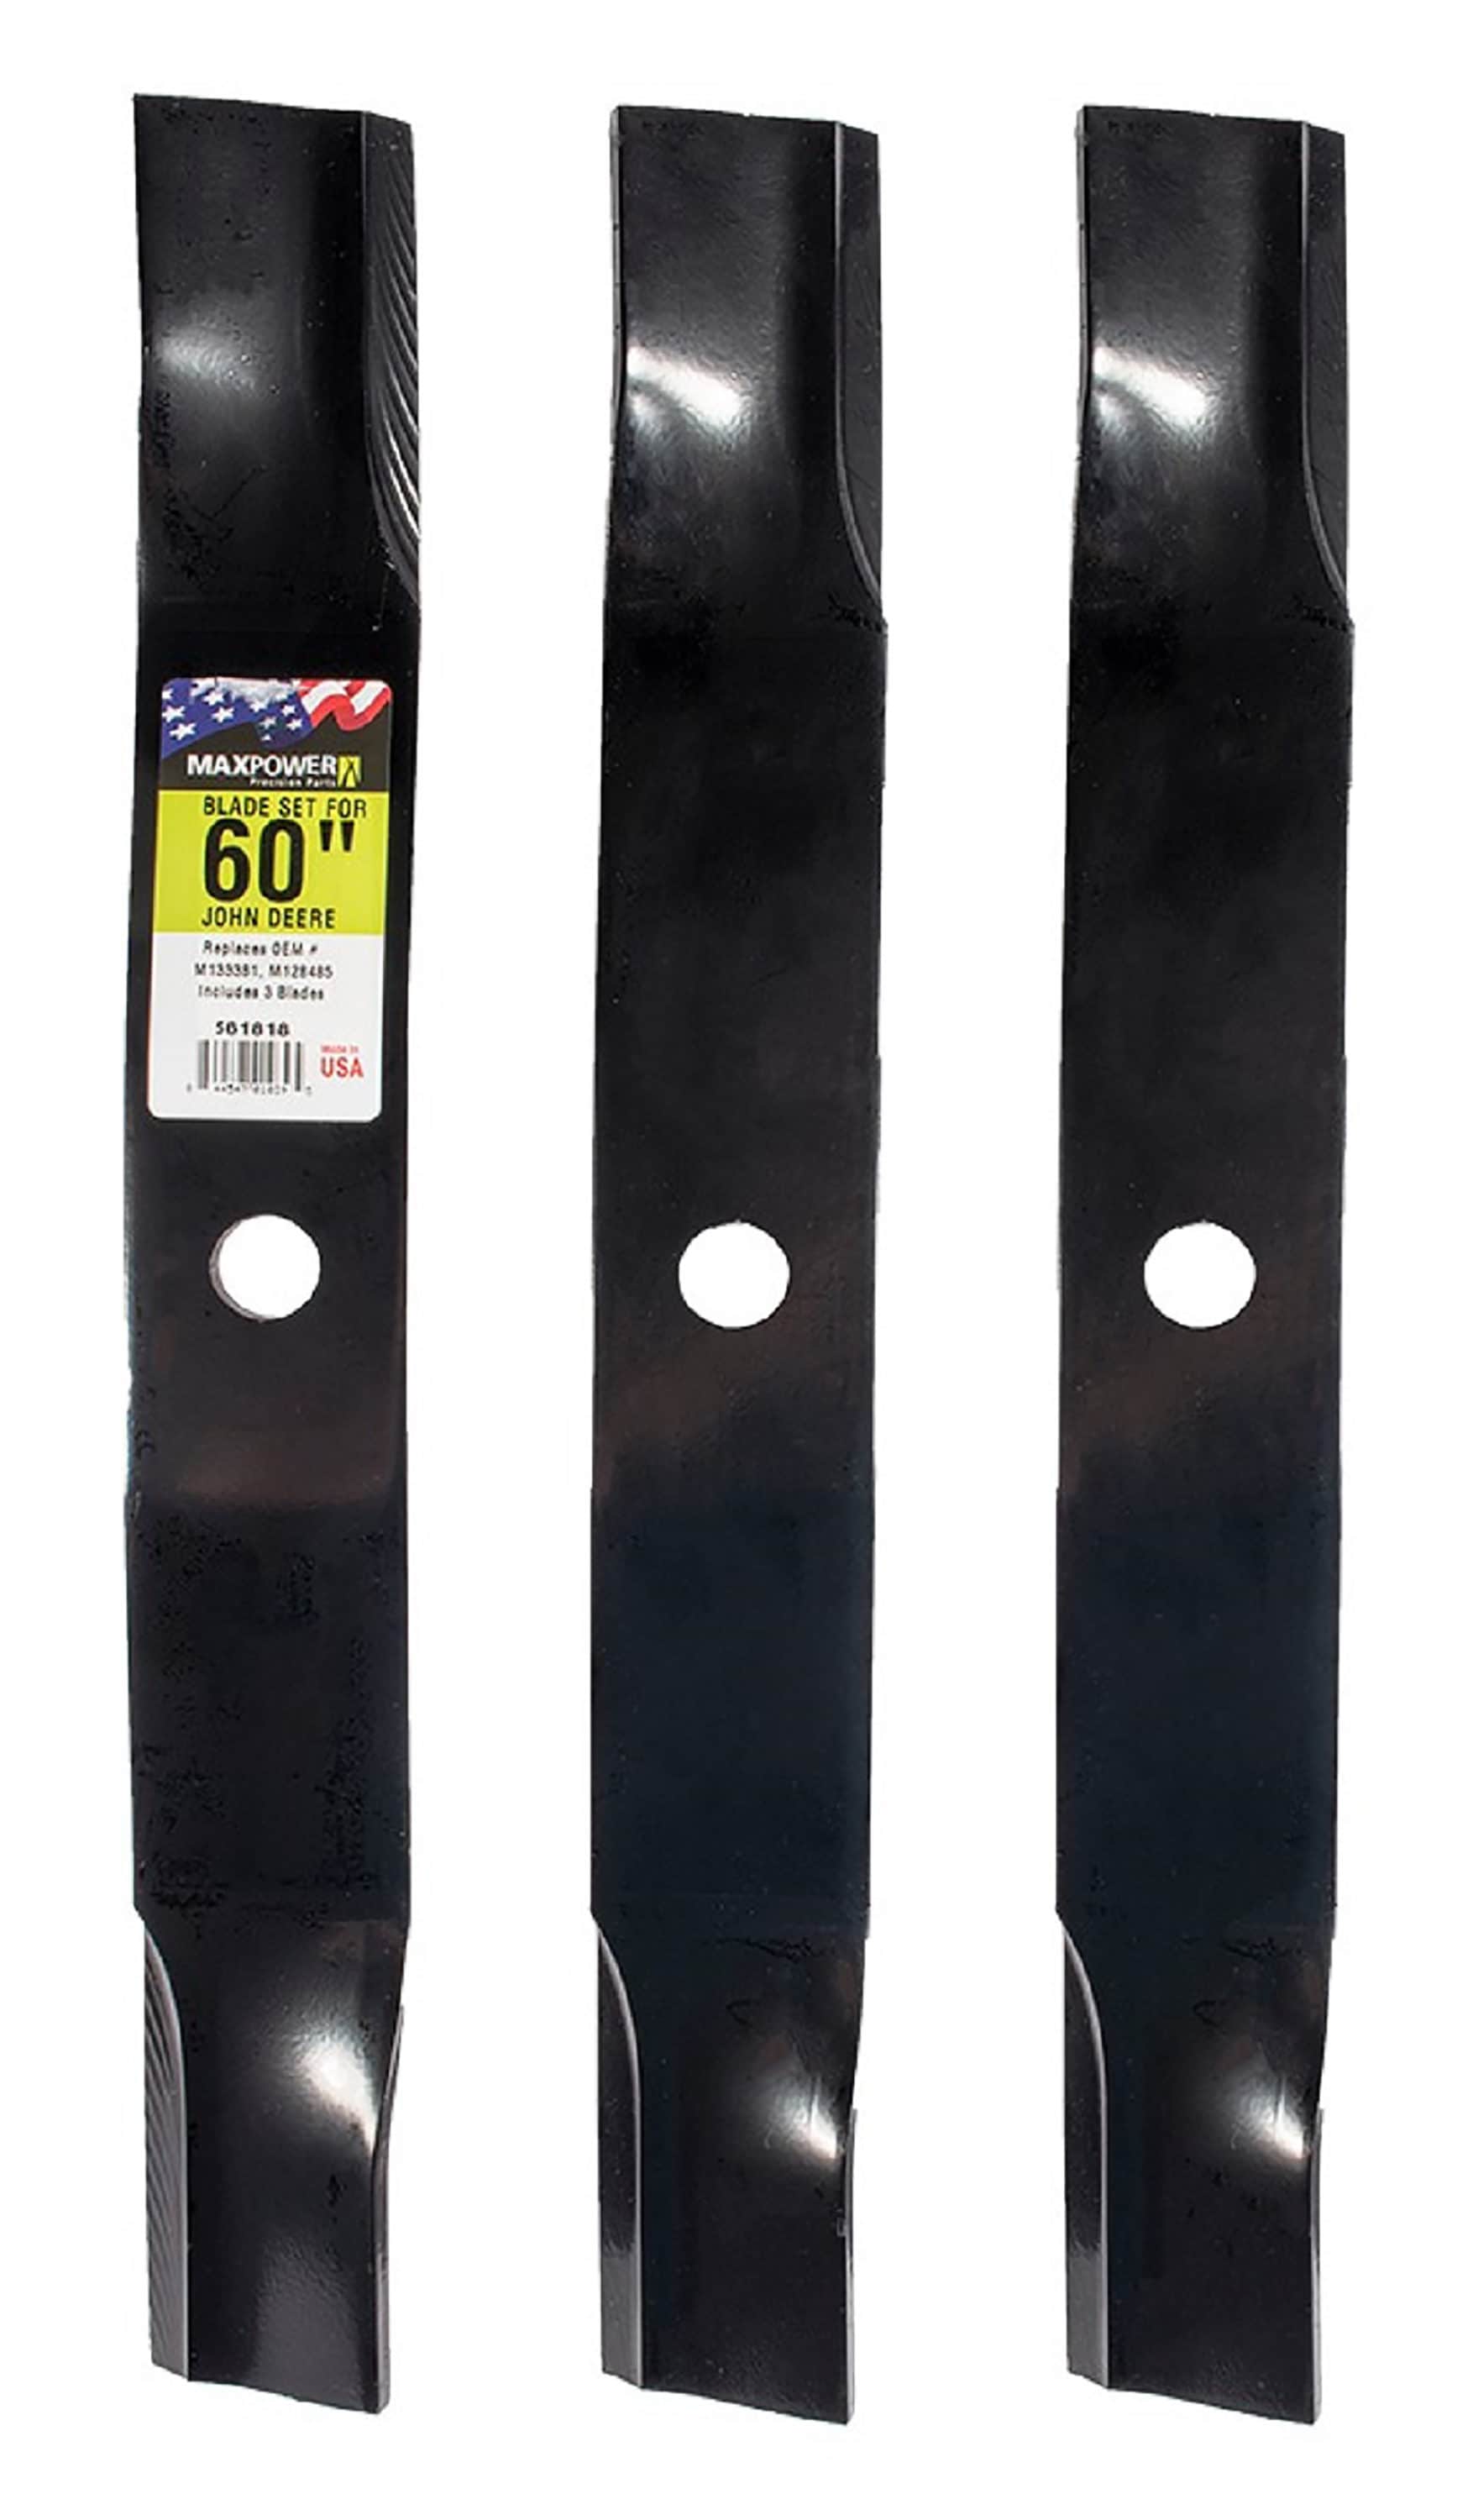 60" Rotary #14937 Lawn Mower Blade Replacement Set 3 Blades For John Deere TCU15 